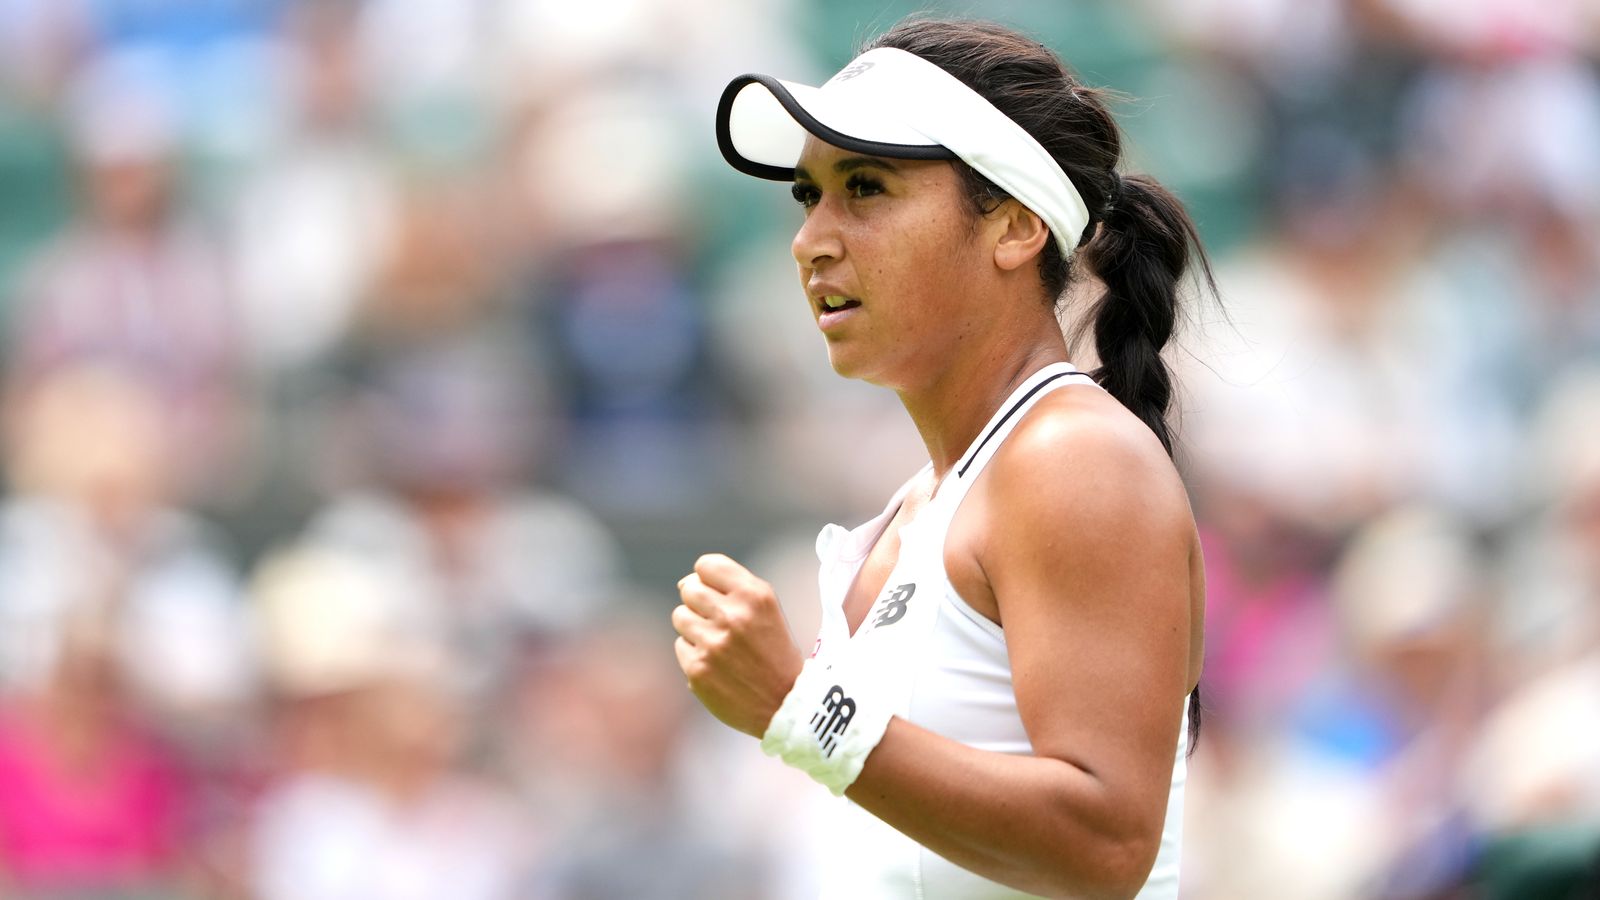 Wimbledon: Heather Watson charges into fourth round for first time in career